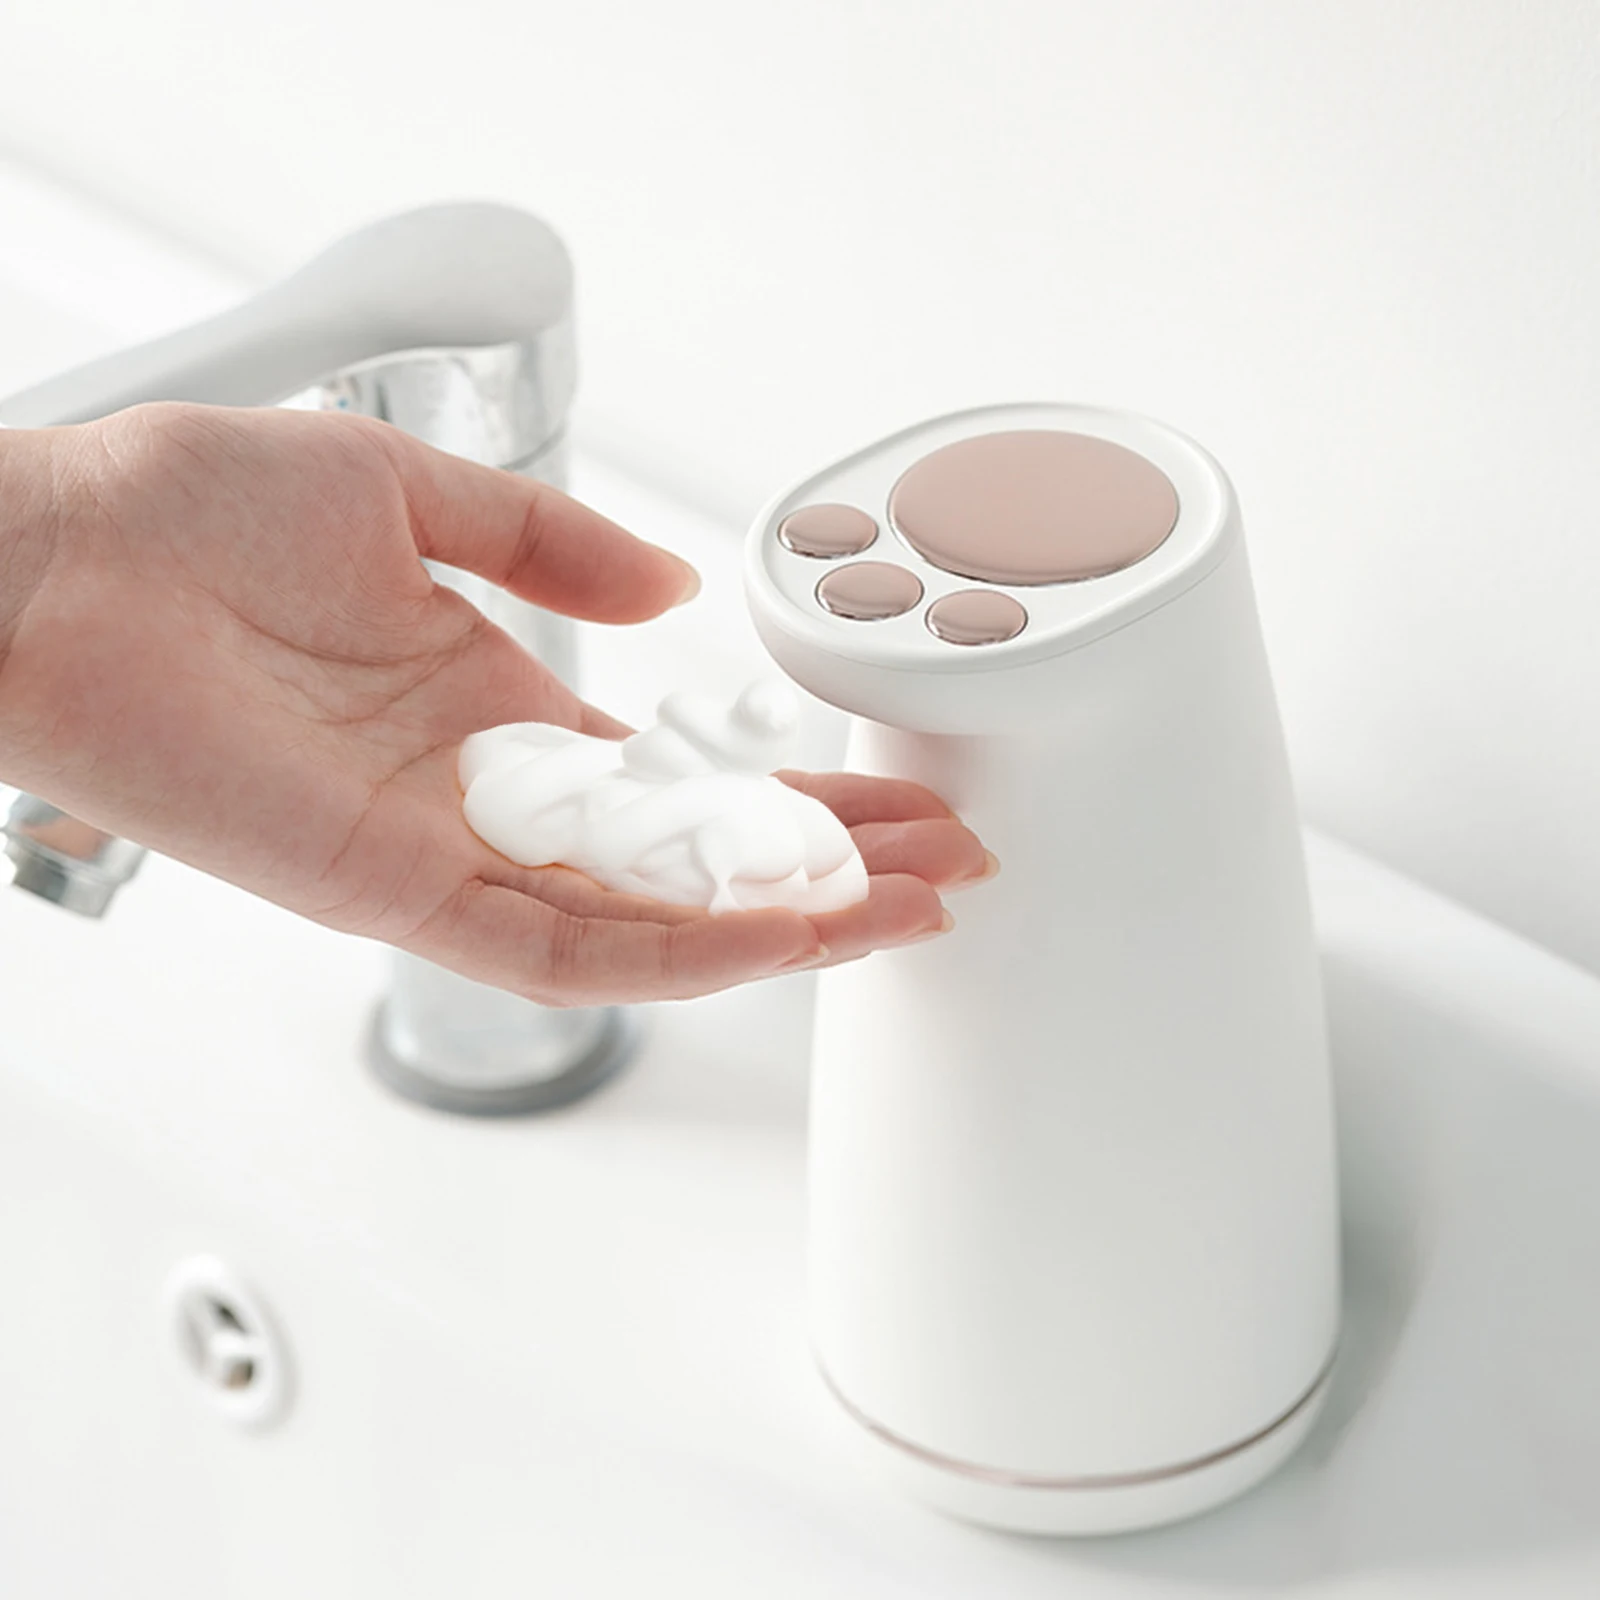 

Dispenser Soap Liquid Soap Dispensers 300mL Cat Paw Shaped Automatic Infrared Foam Soap Dispenser Touchless USB Rechargeable